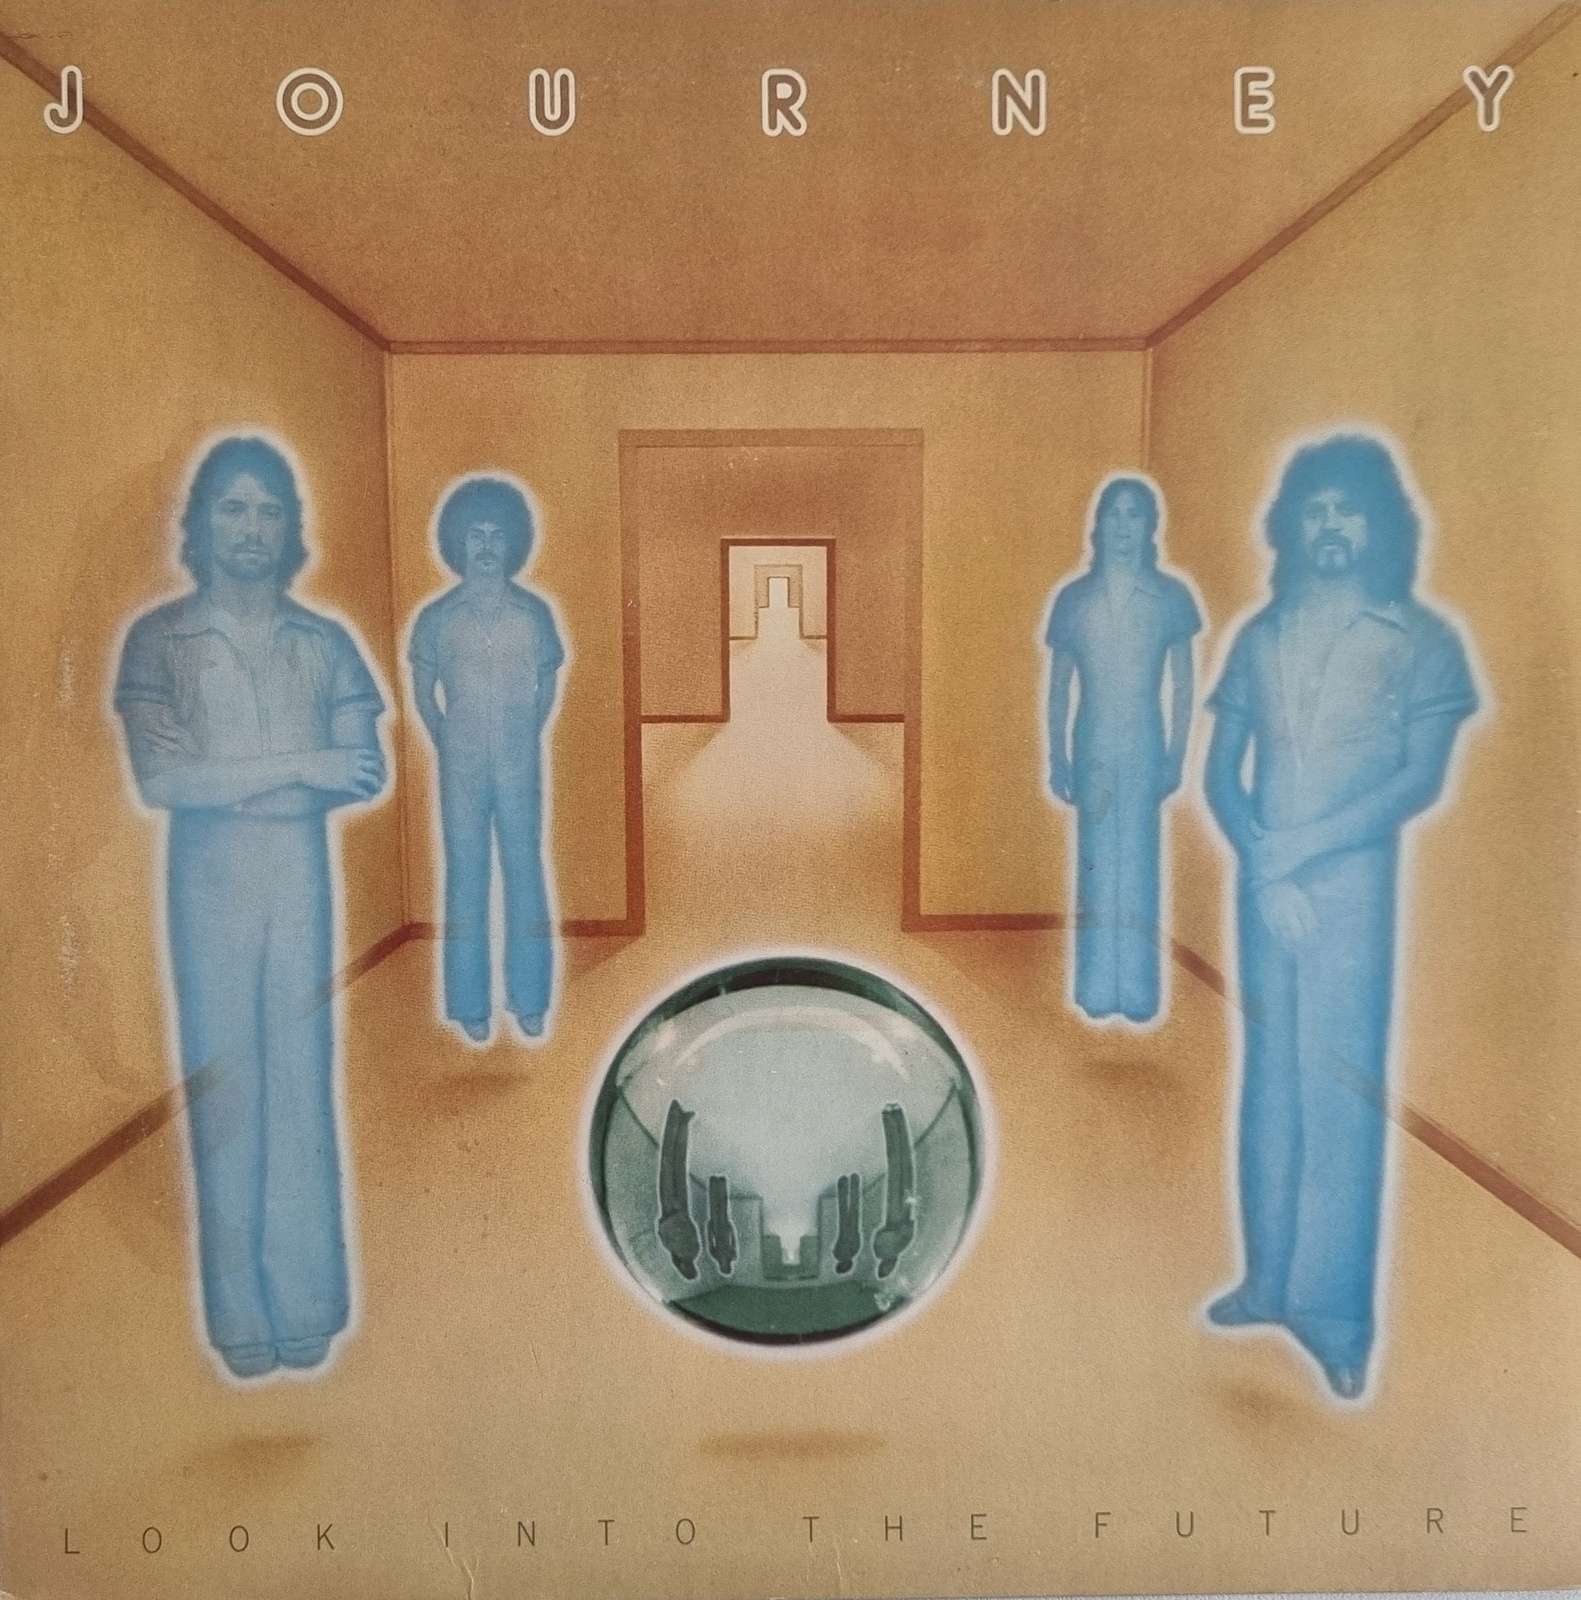 Journey - Looking into the Future